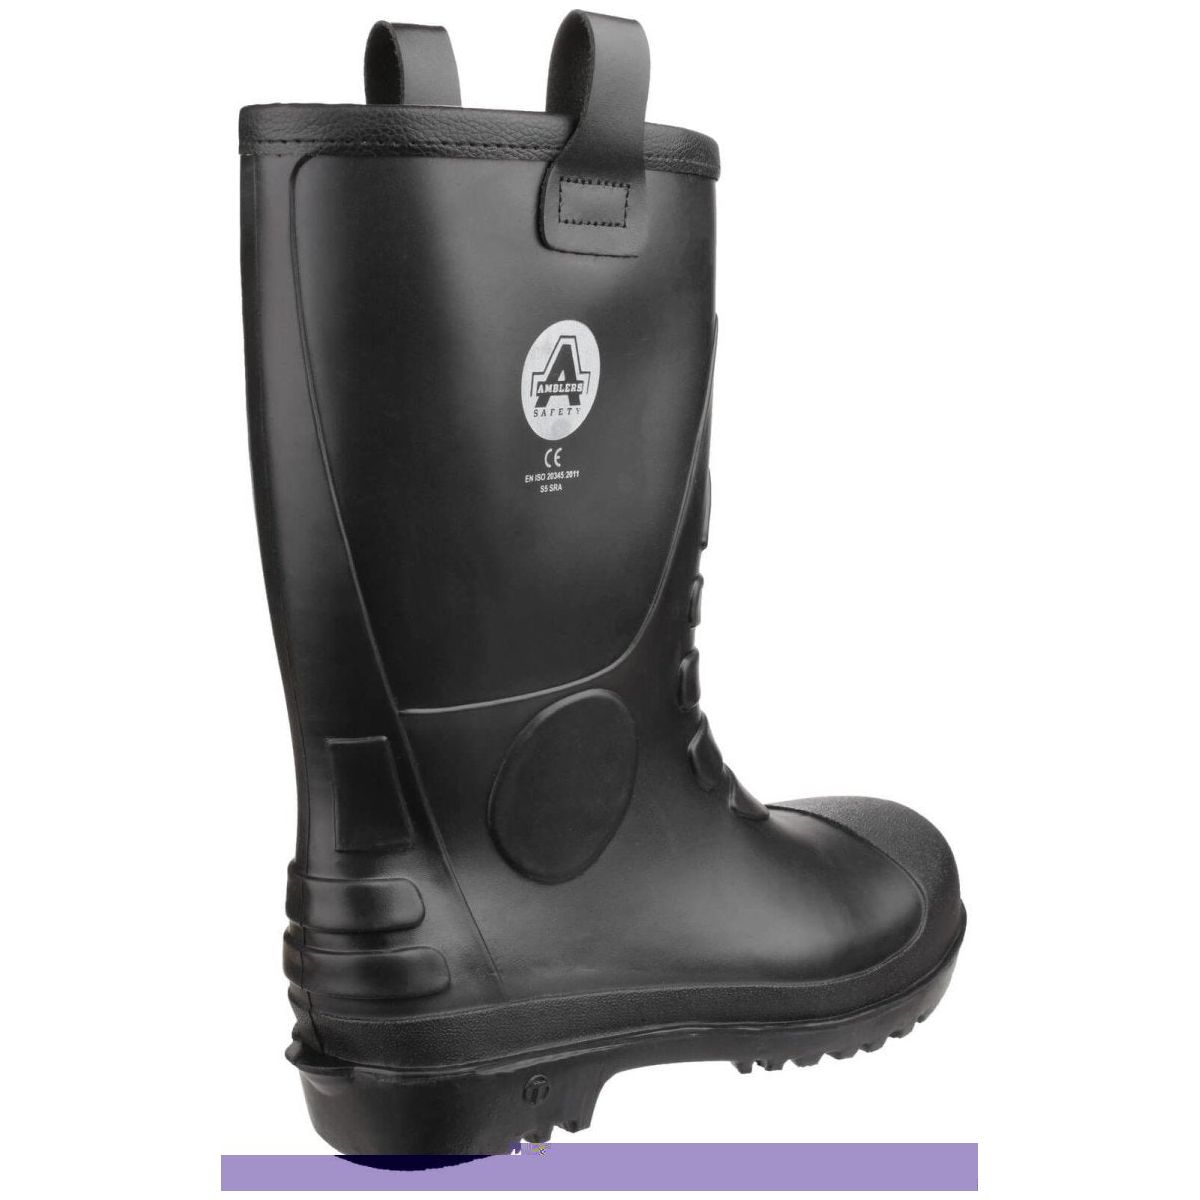 Amblers Fs90 Waterproof Pvc Safety Rigger Boots Womens - workweargurus.com